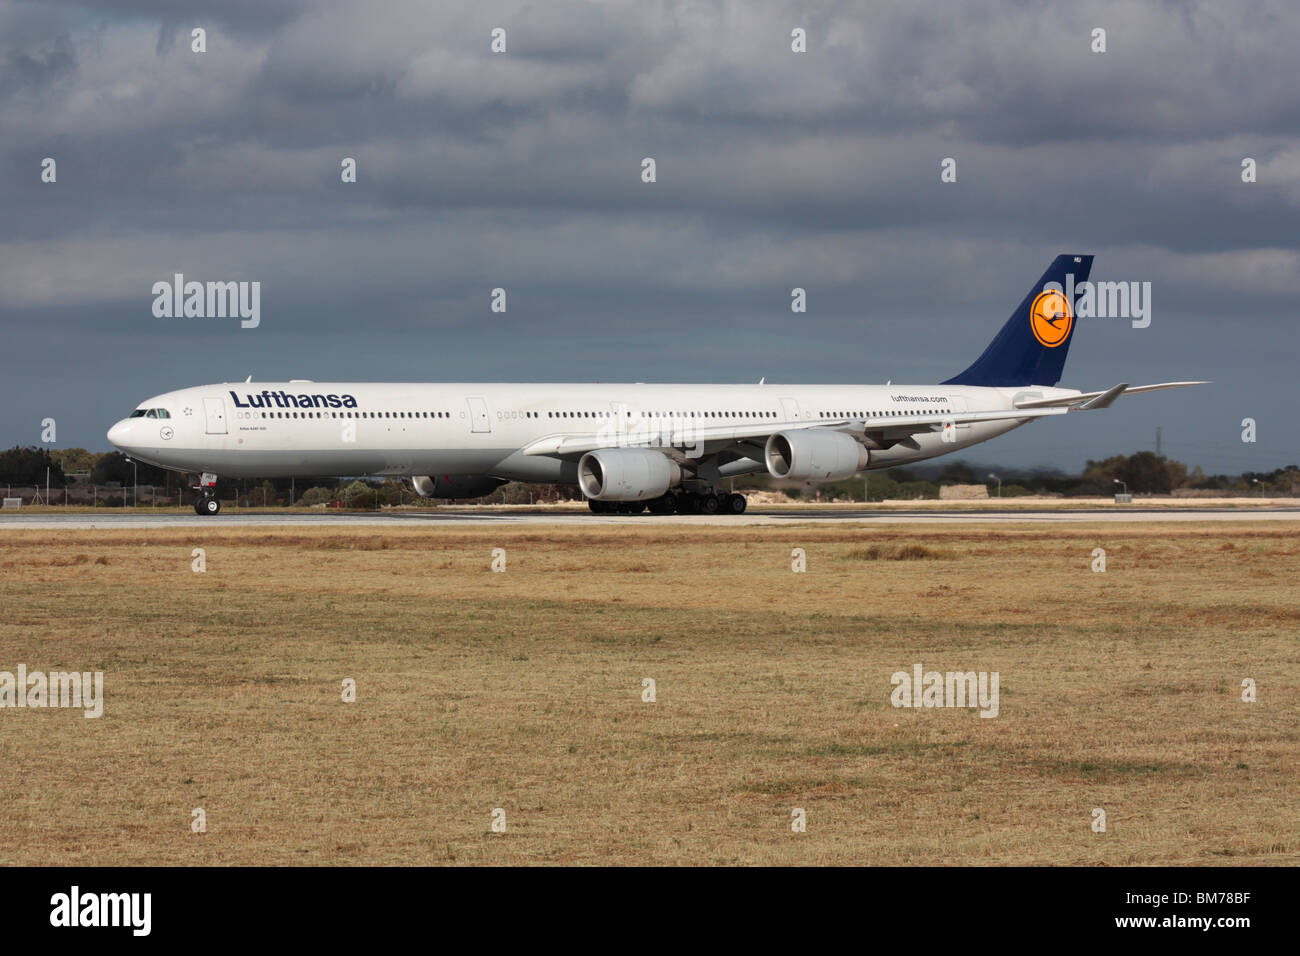 Lufthansa Airbus A340-600 long-haul widebody passenger jet plane lining up on the runway for departure from Malta Stock Photo